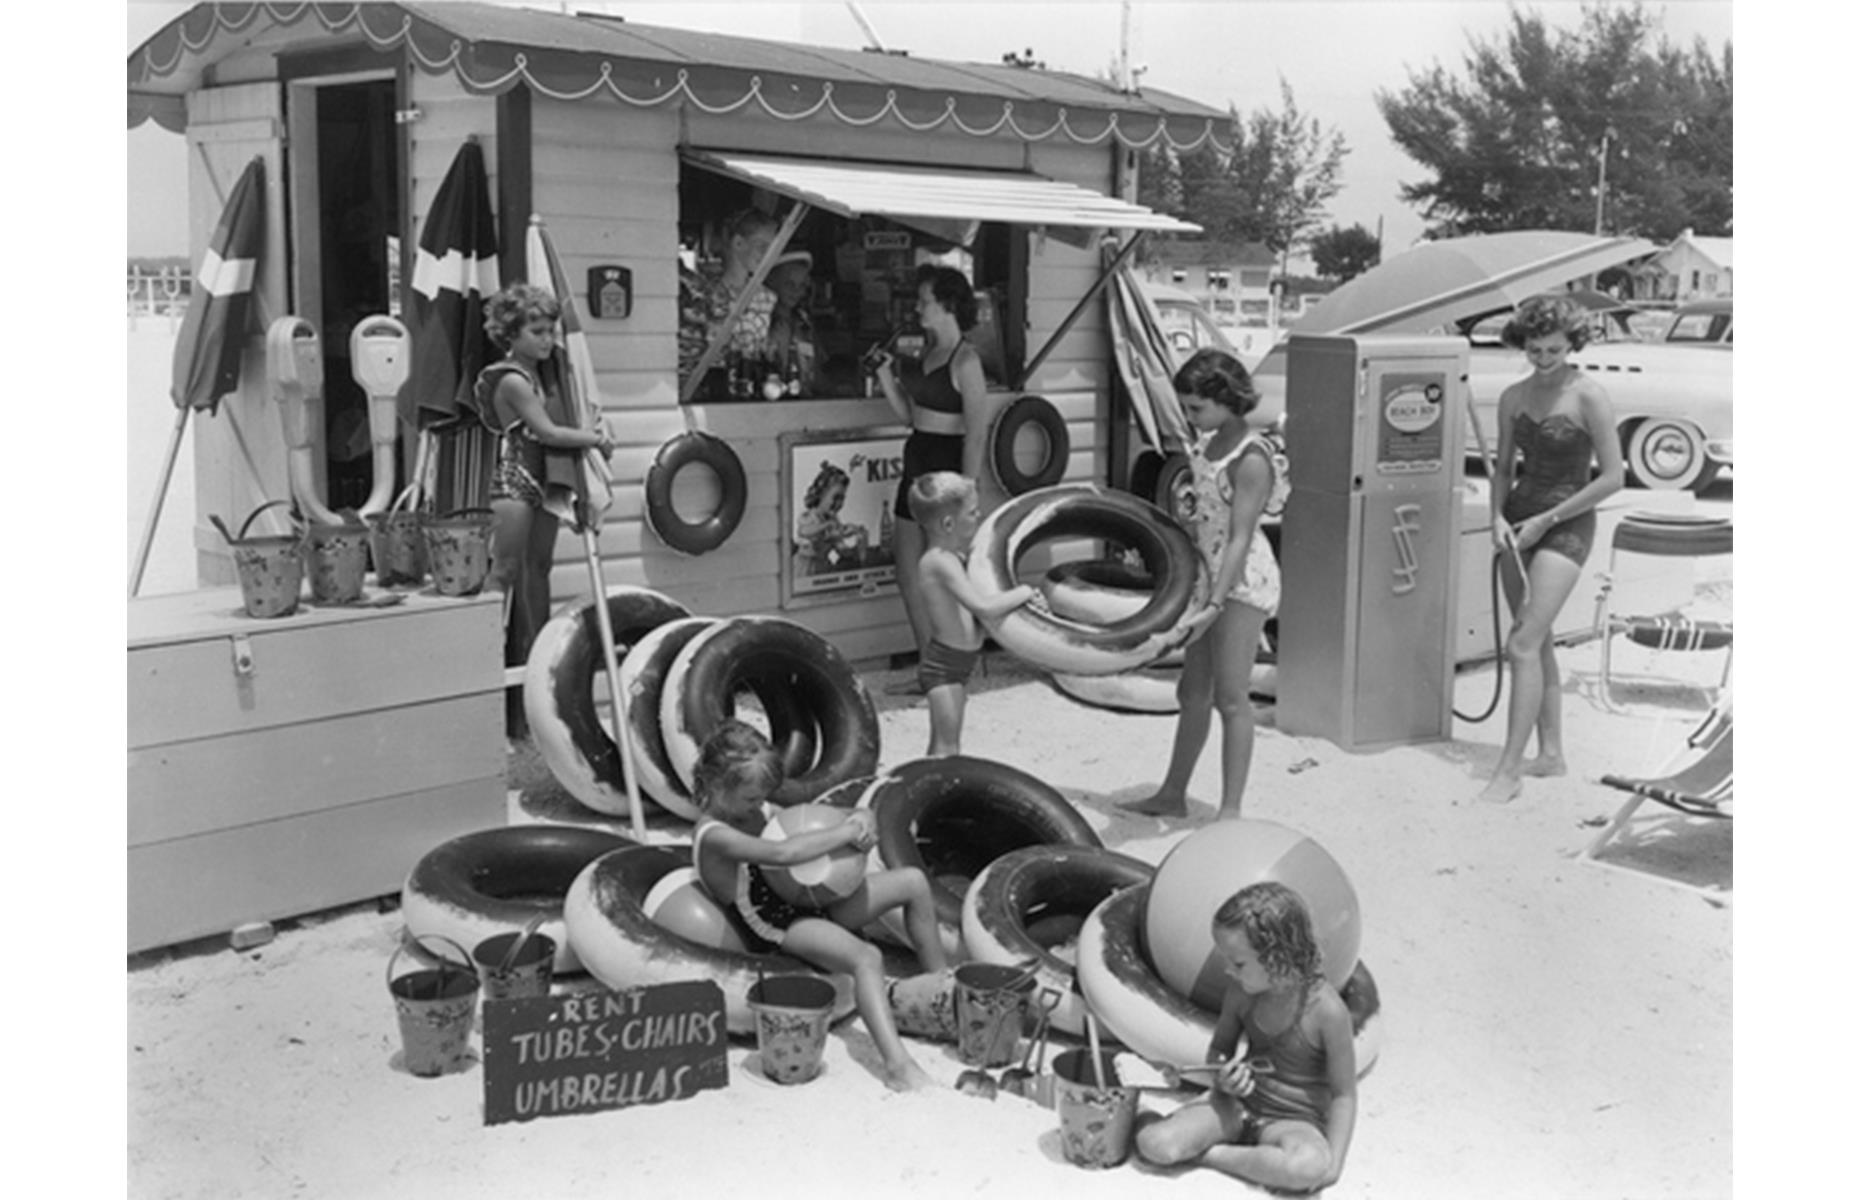 Close to St Pete, Treasure Island was another sun-drenched Florida city that pulled in the crowds over summer. This lovely 1951 shot shows a family hiring water donuts and umbrellas from a little wooden shack, readying themselves for Treasure Island's postcard-perfect beach.